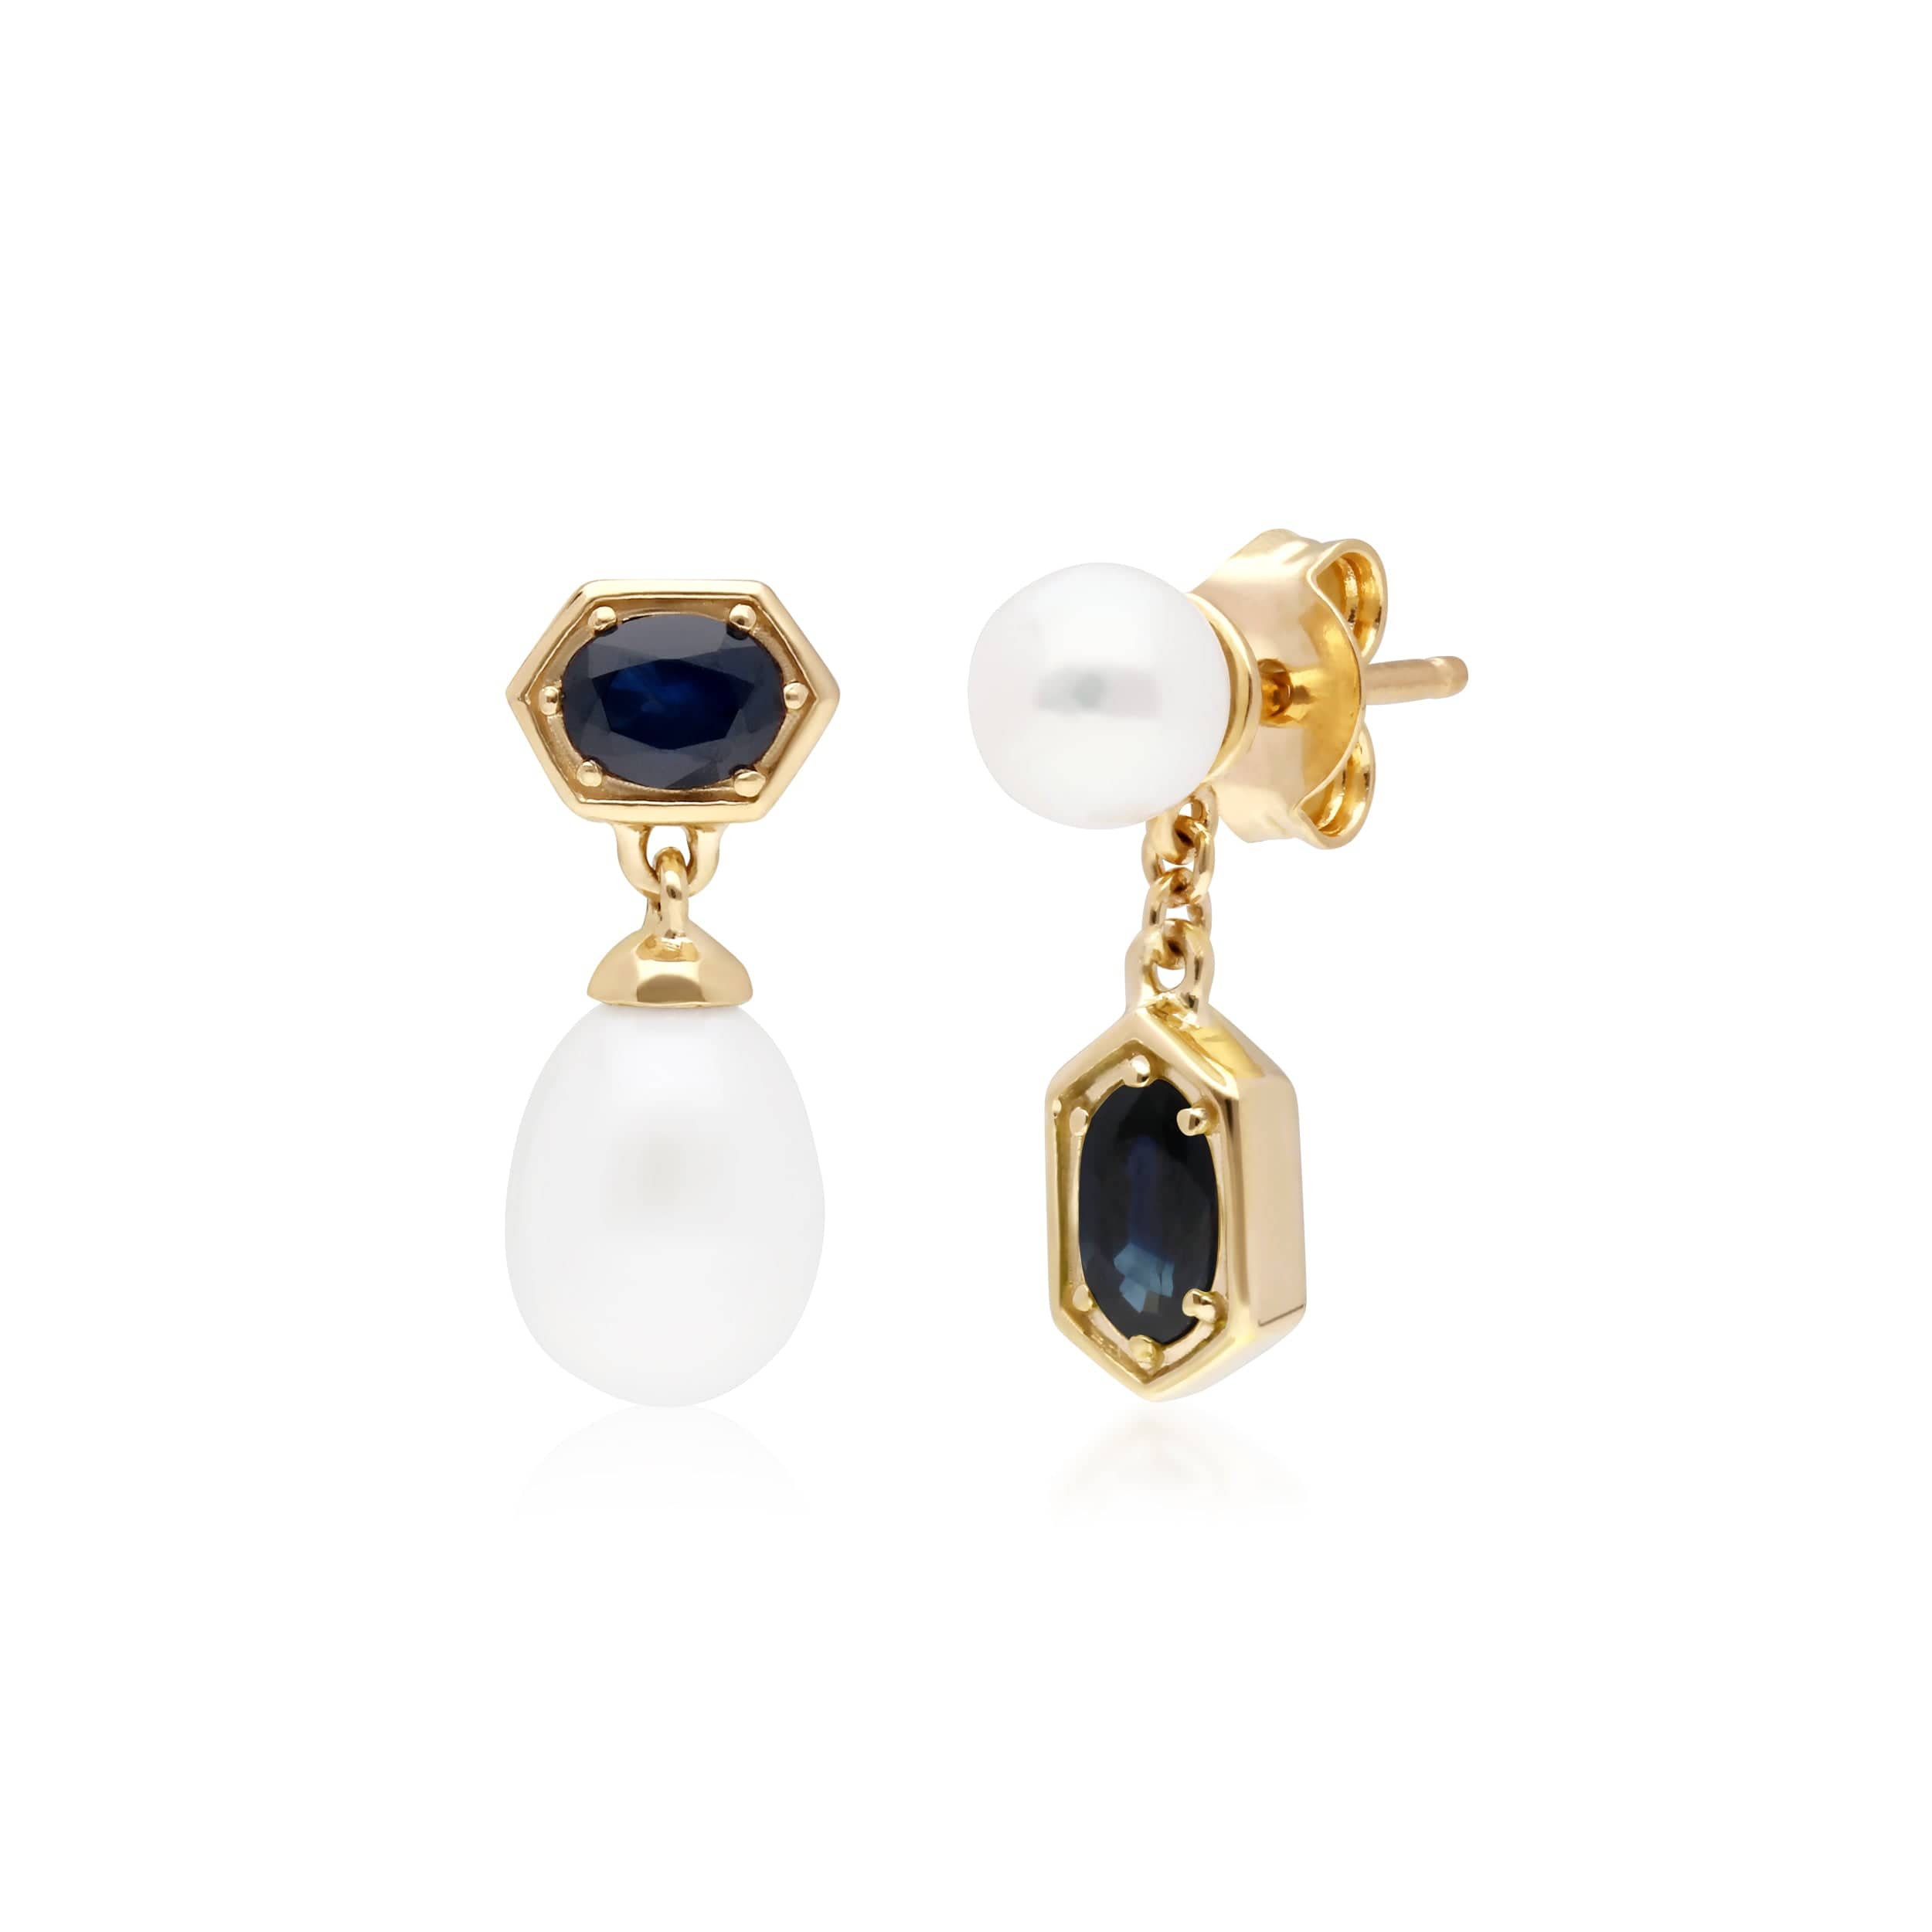 Modern Pearl & Sapphire Mismatched Drop Earrings in Gold Plated Sterling Silver